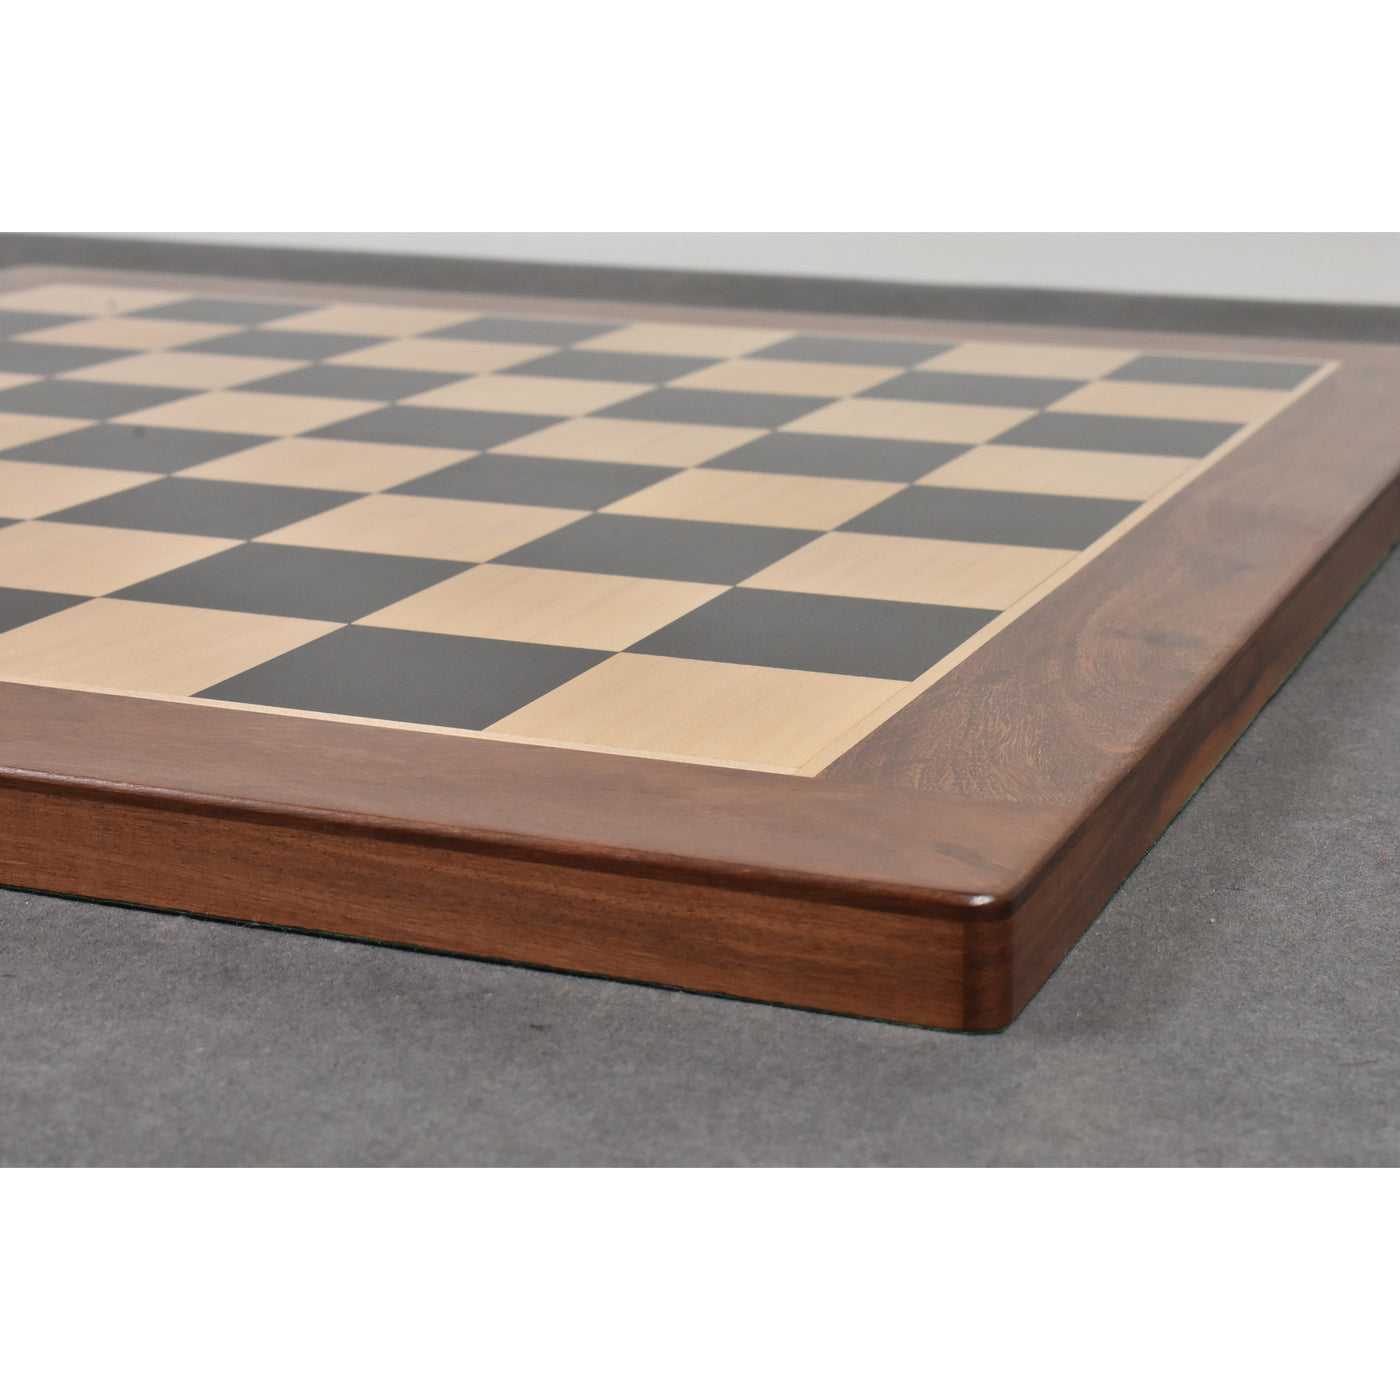 Combo of 4.6" Spartacus Luxury Staunton Chess Set - Pieces in Ebony Wood with 23" Large Ebony & Maple Wood Chessboard and Storage Box